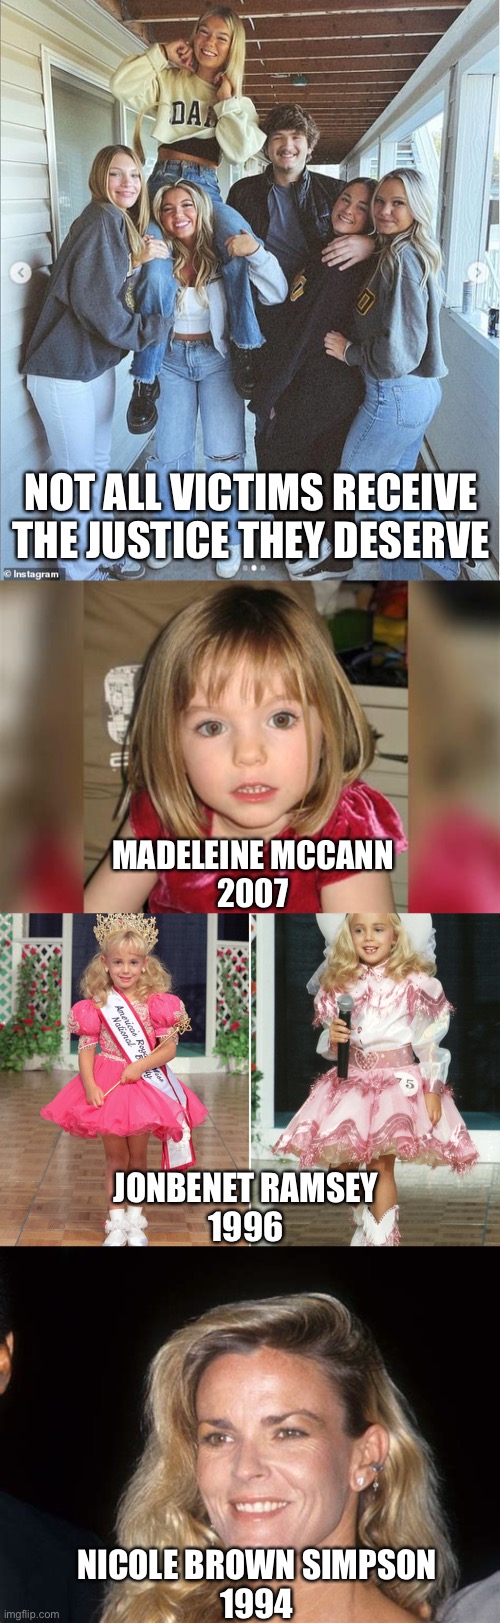 So few make the news. Every year there are hundreds in Chicago alone. | NOT ALL VICTIMS RECEIVE THE JUSTICE THEY DESERVE; MADELEINE MCCANN
2007; JONBENET RAMSEY
1996; NICOLE BROWN SIMPSON
1994 | image tagged in murders,no justice,moscow idaho,madeleine mccann,jonbenet ramsey,nicole brown simpson | made w/ Imgflip meme maker